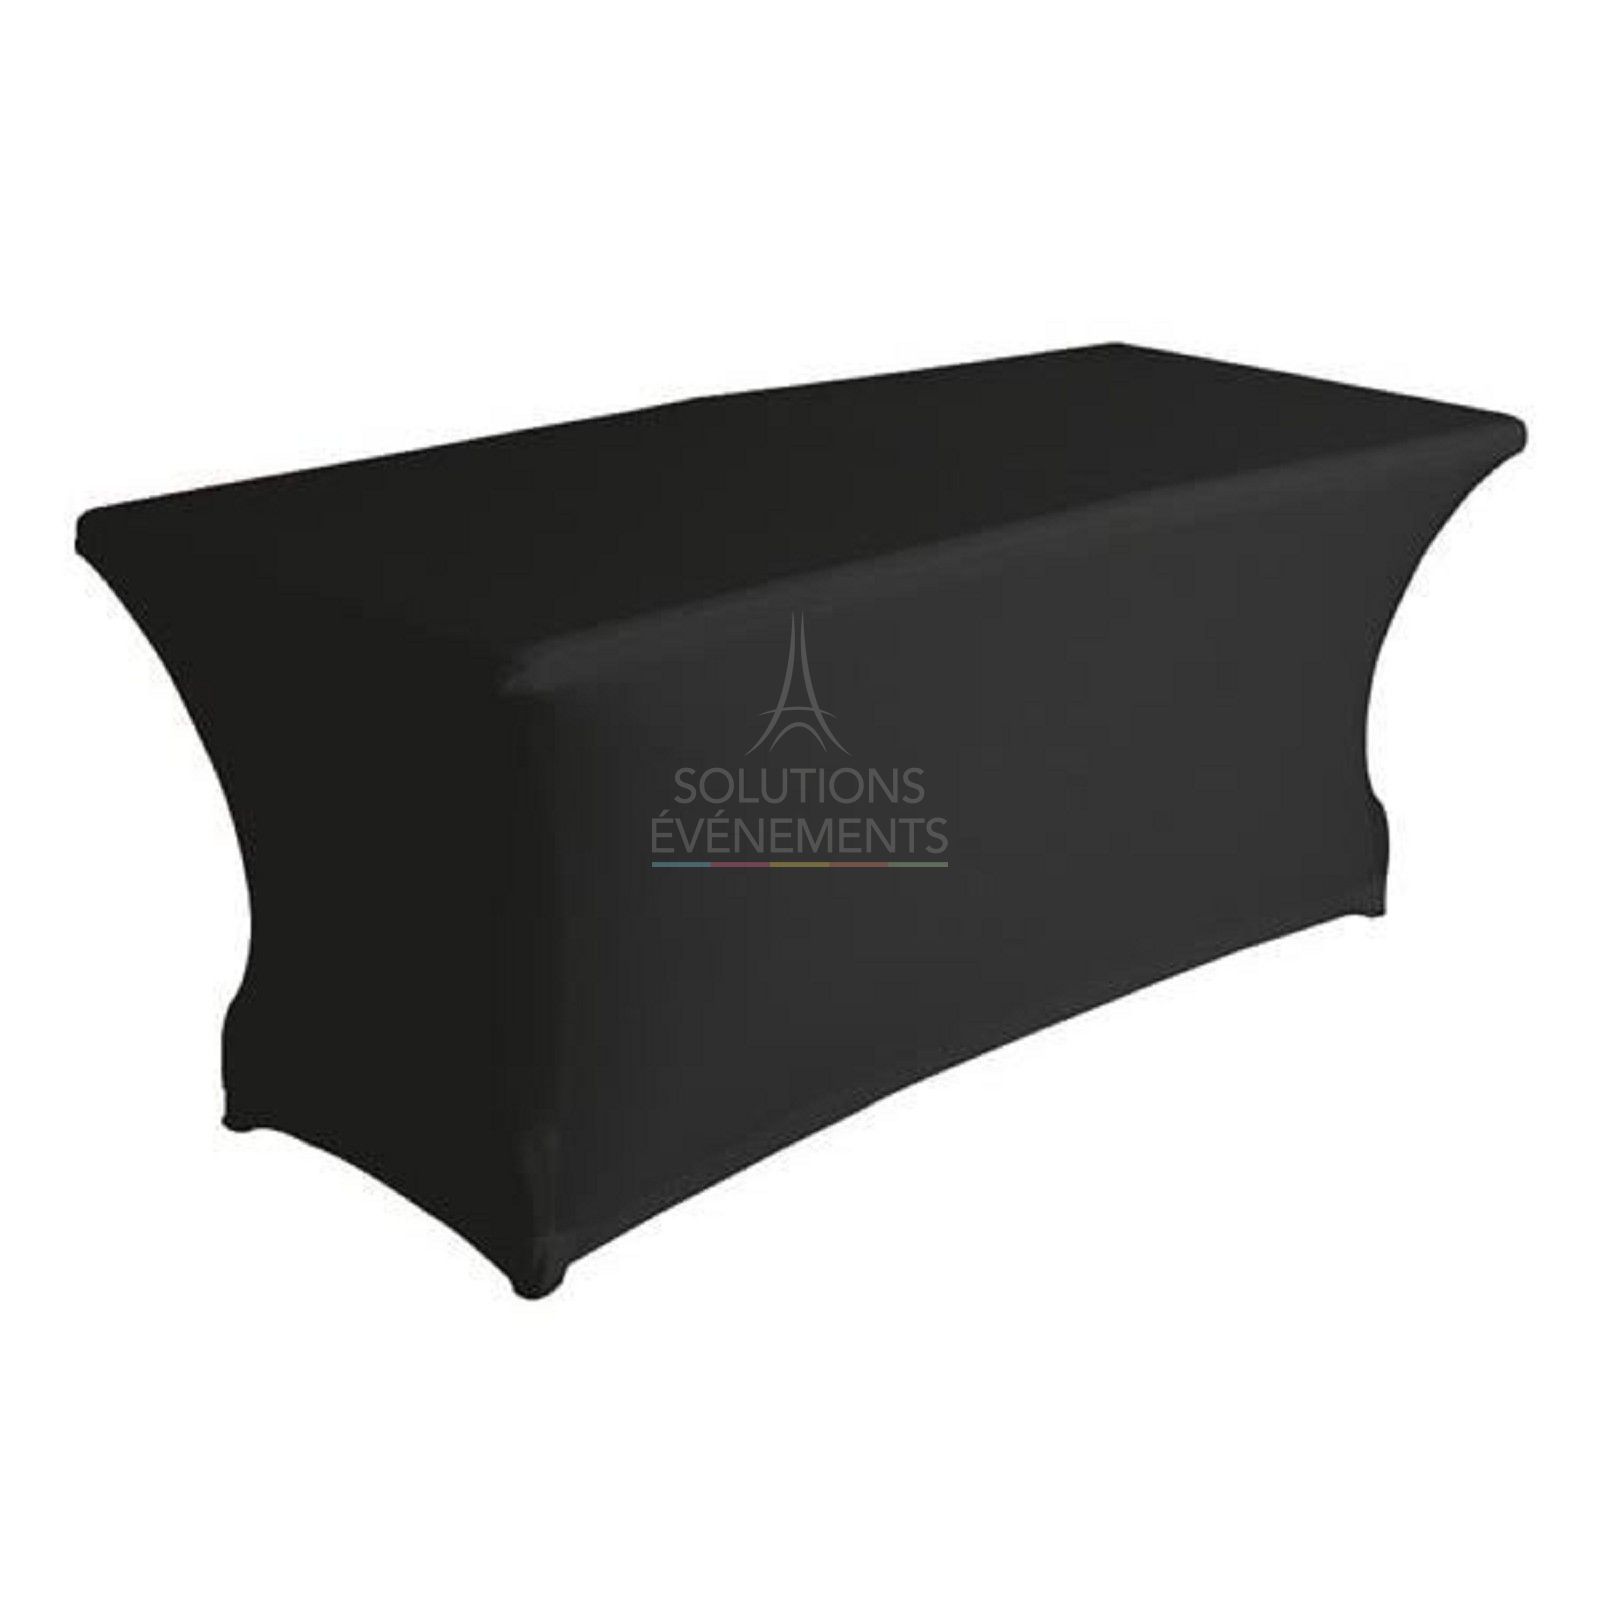 Rental of rectangle table with black cover. For approximately 4 people